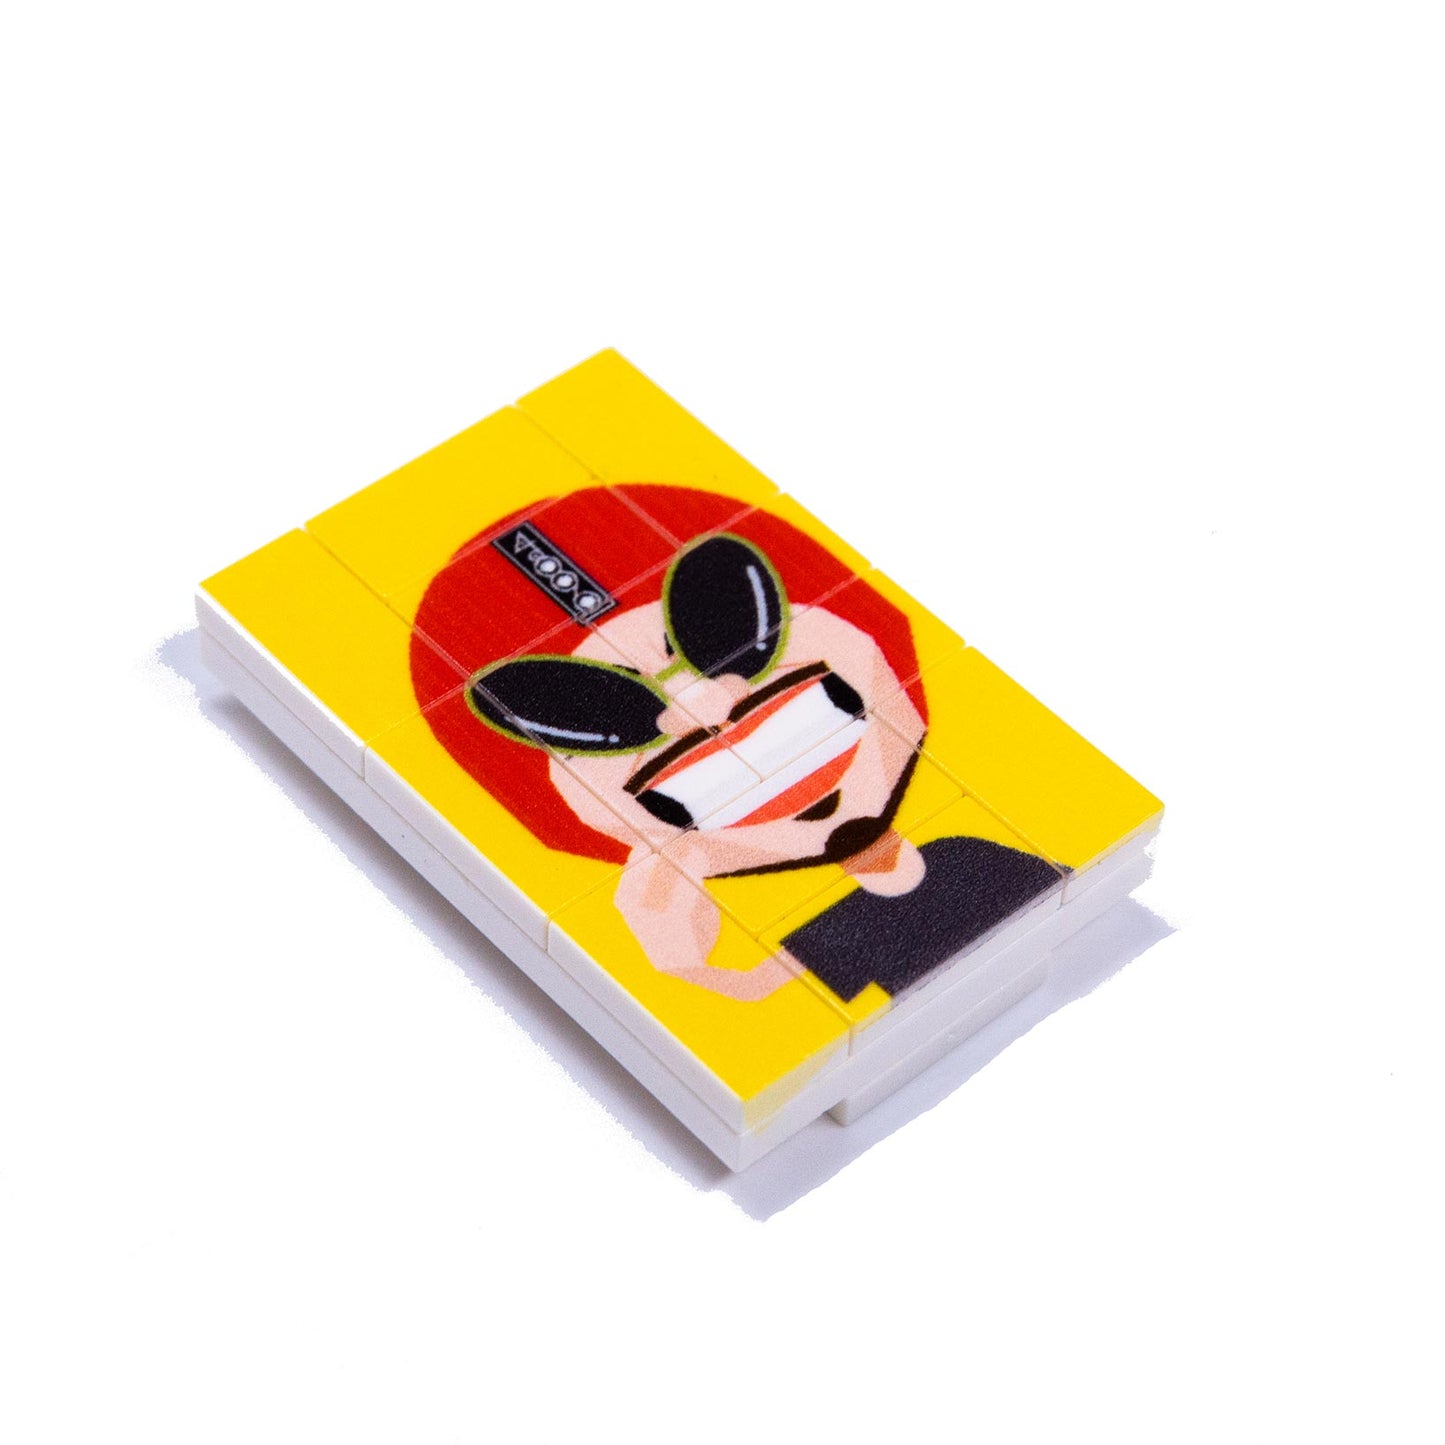 4896 x Namewee Magnet Mini Puzzle (Yellow)